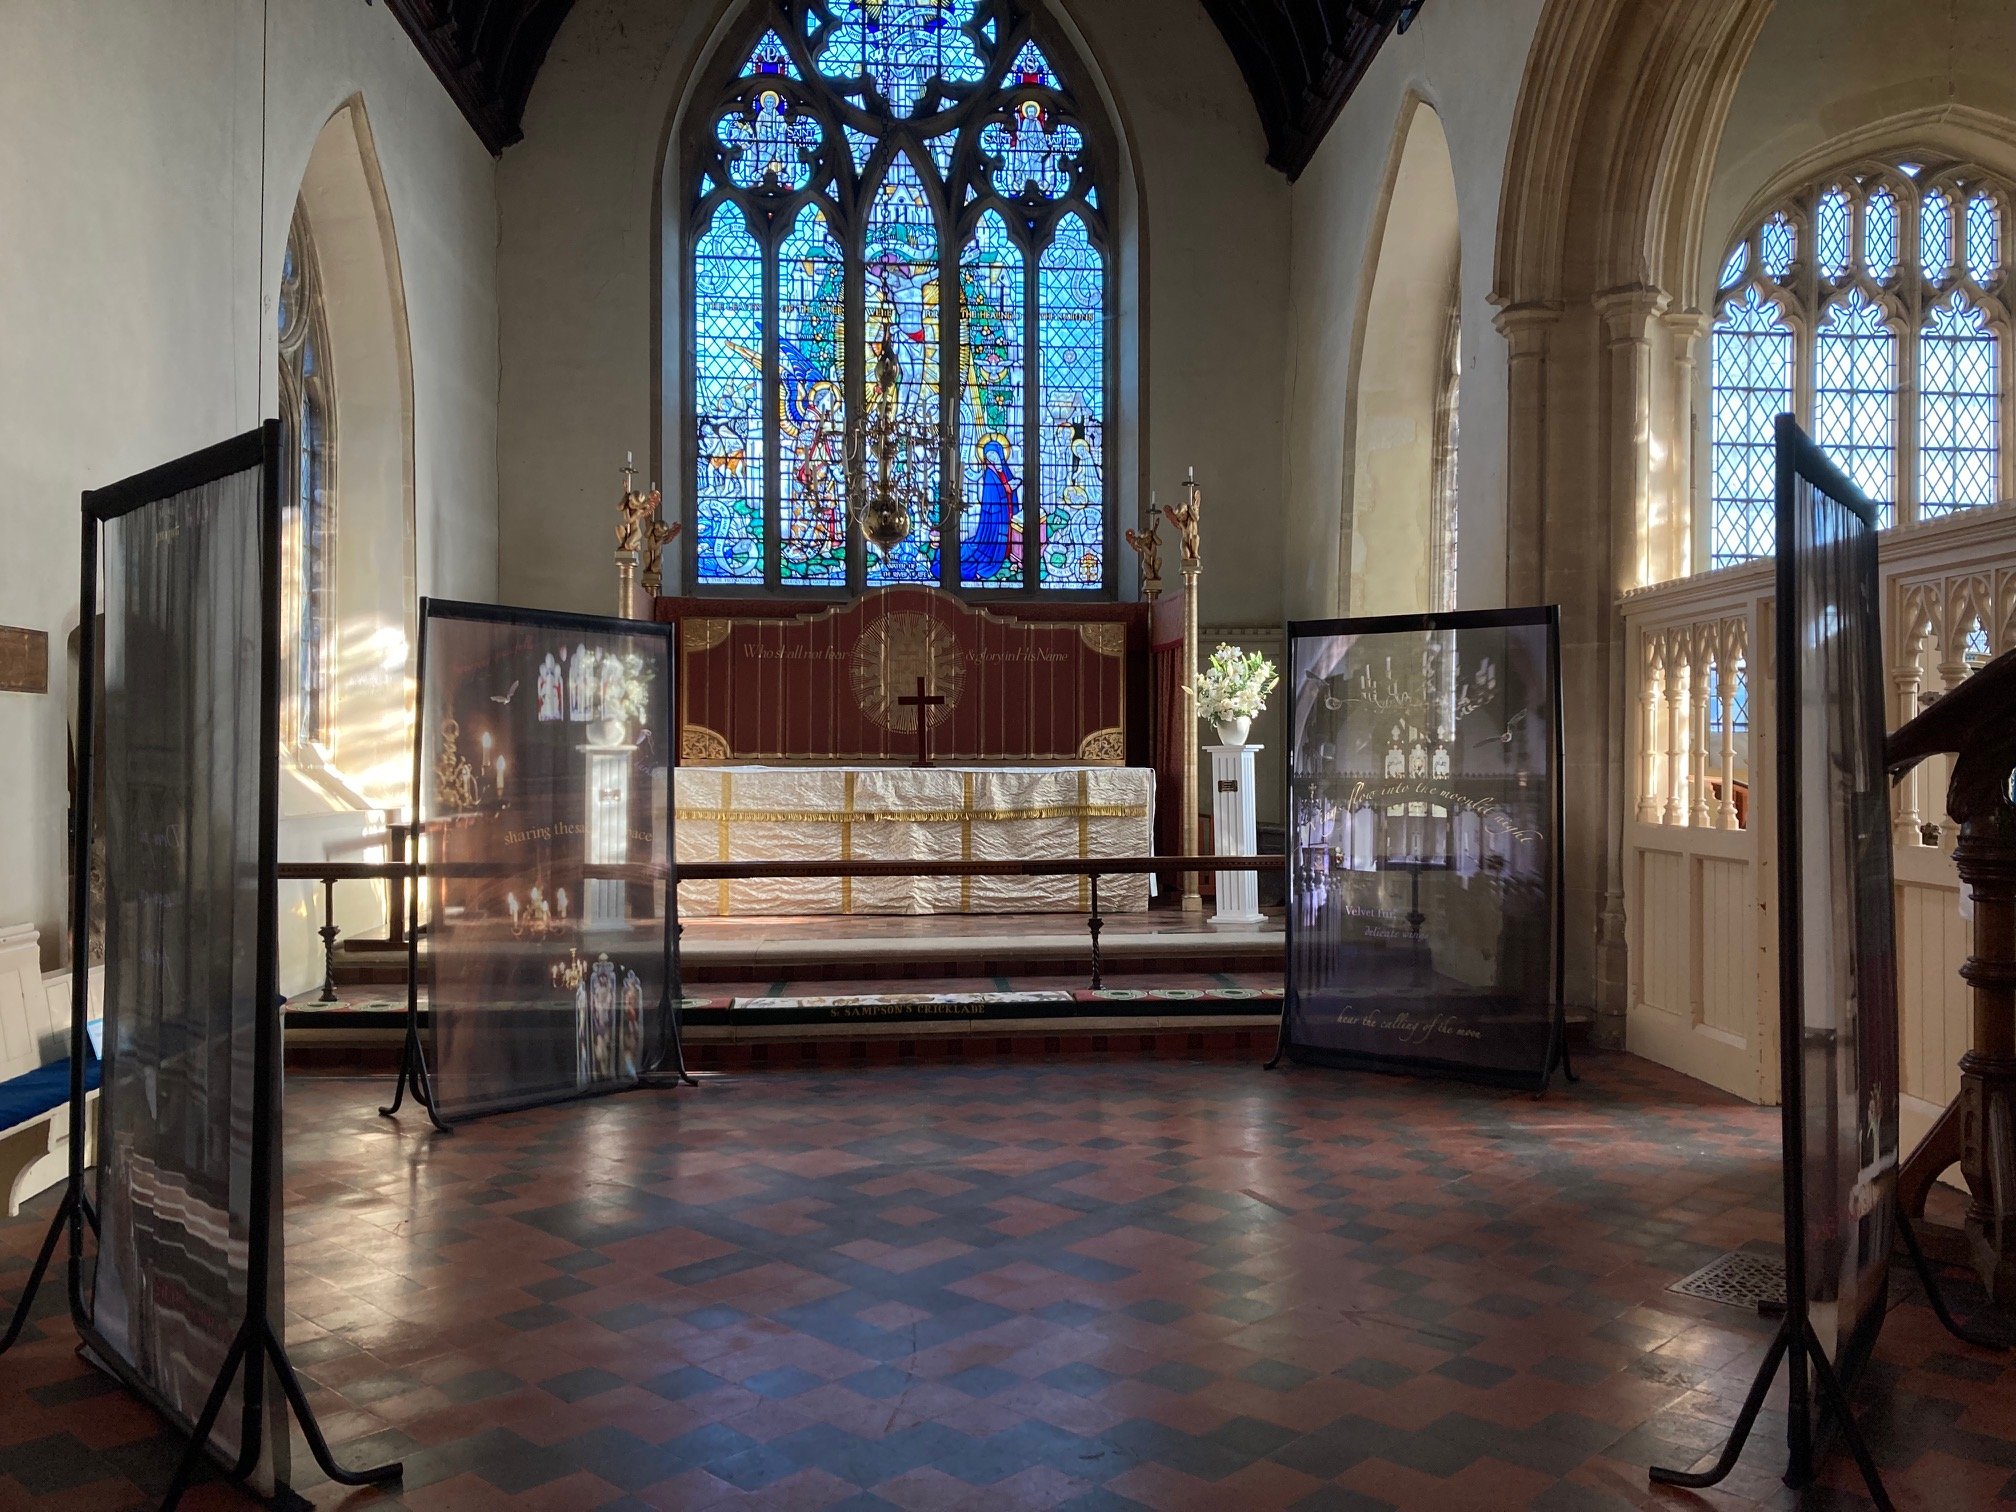 Panels from the On A Wing And A Prayer art installation on display inside St Sampson's Church